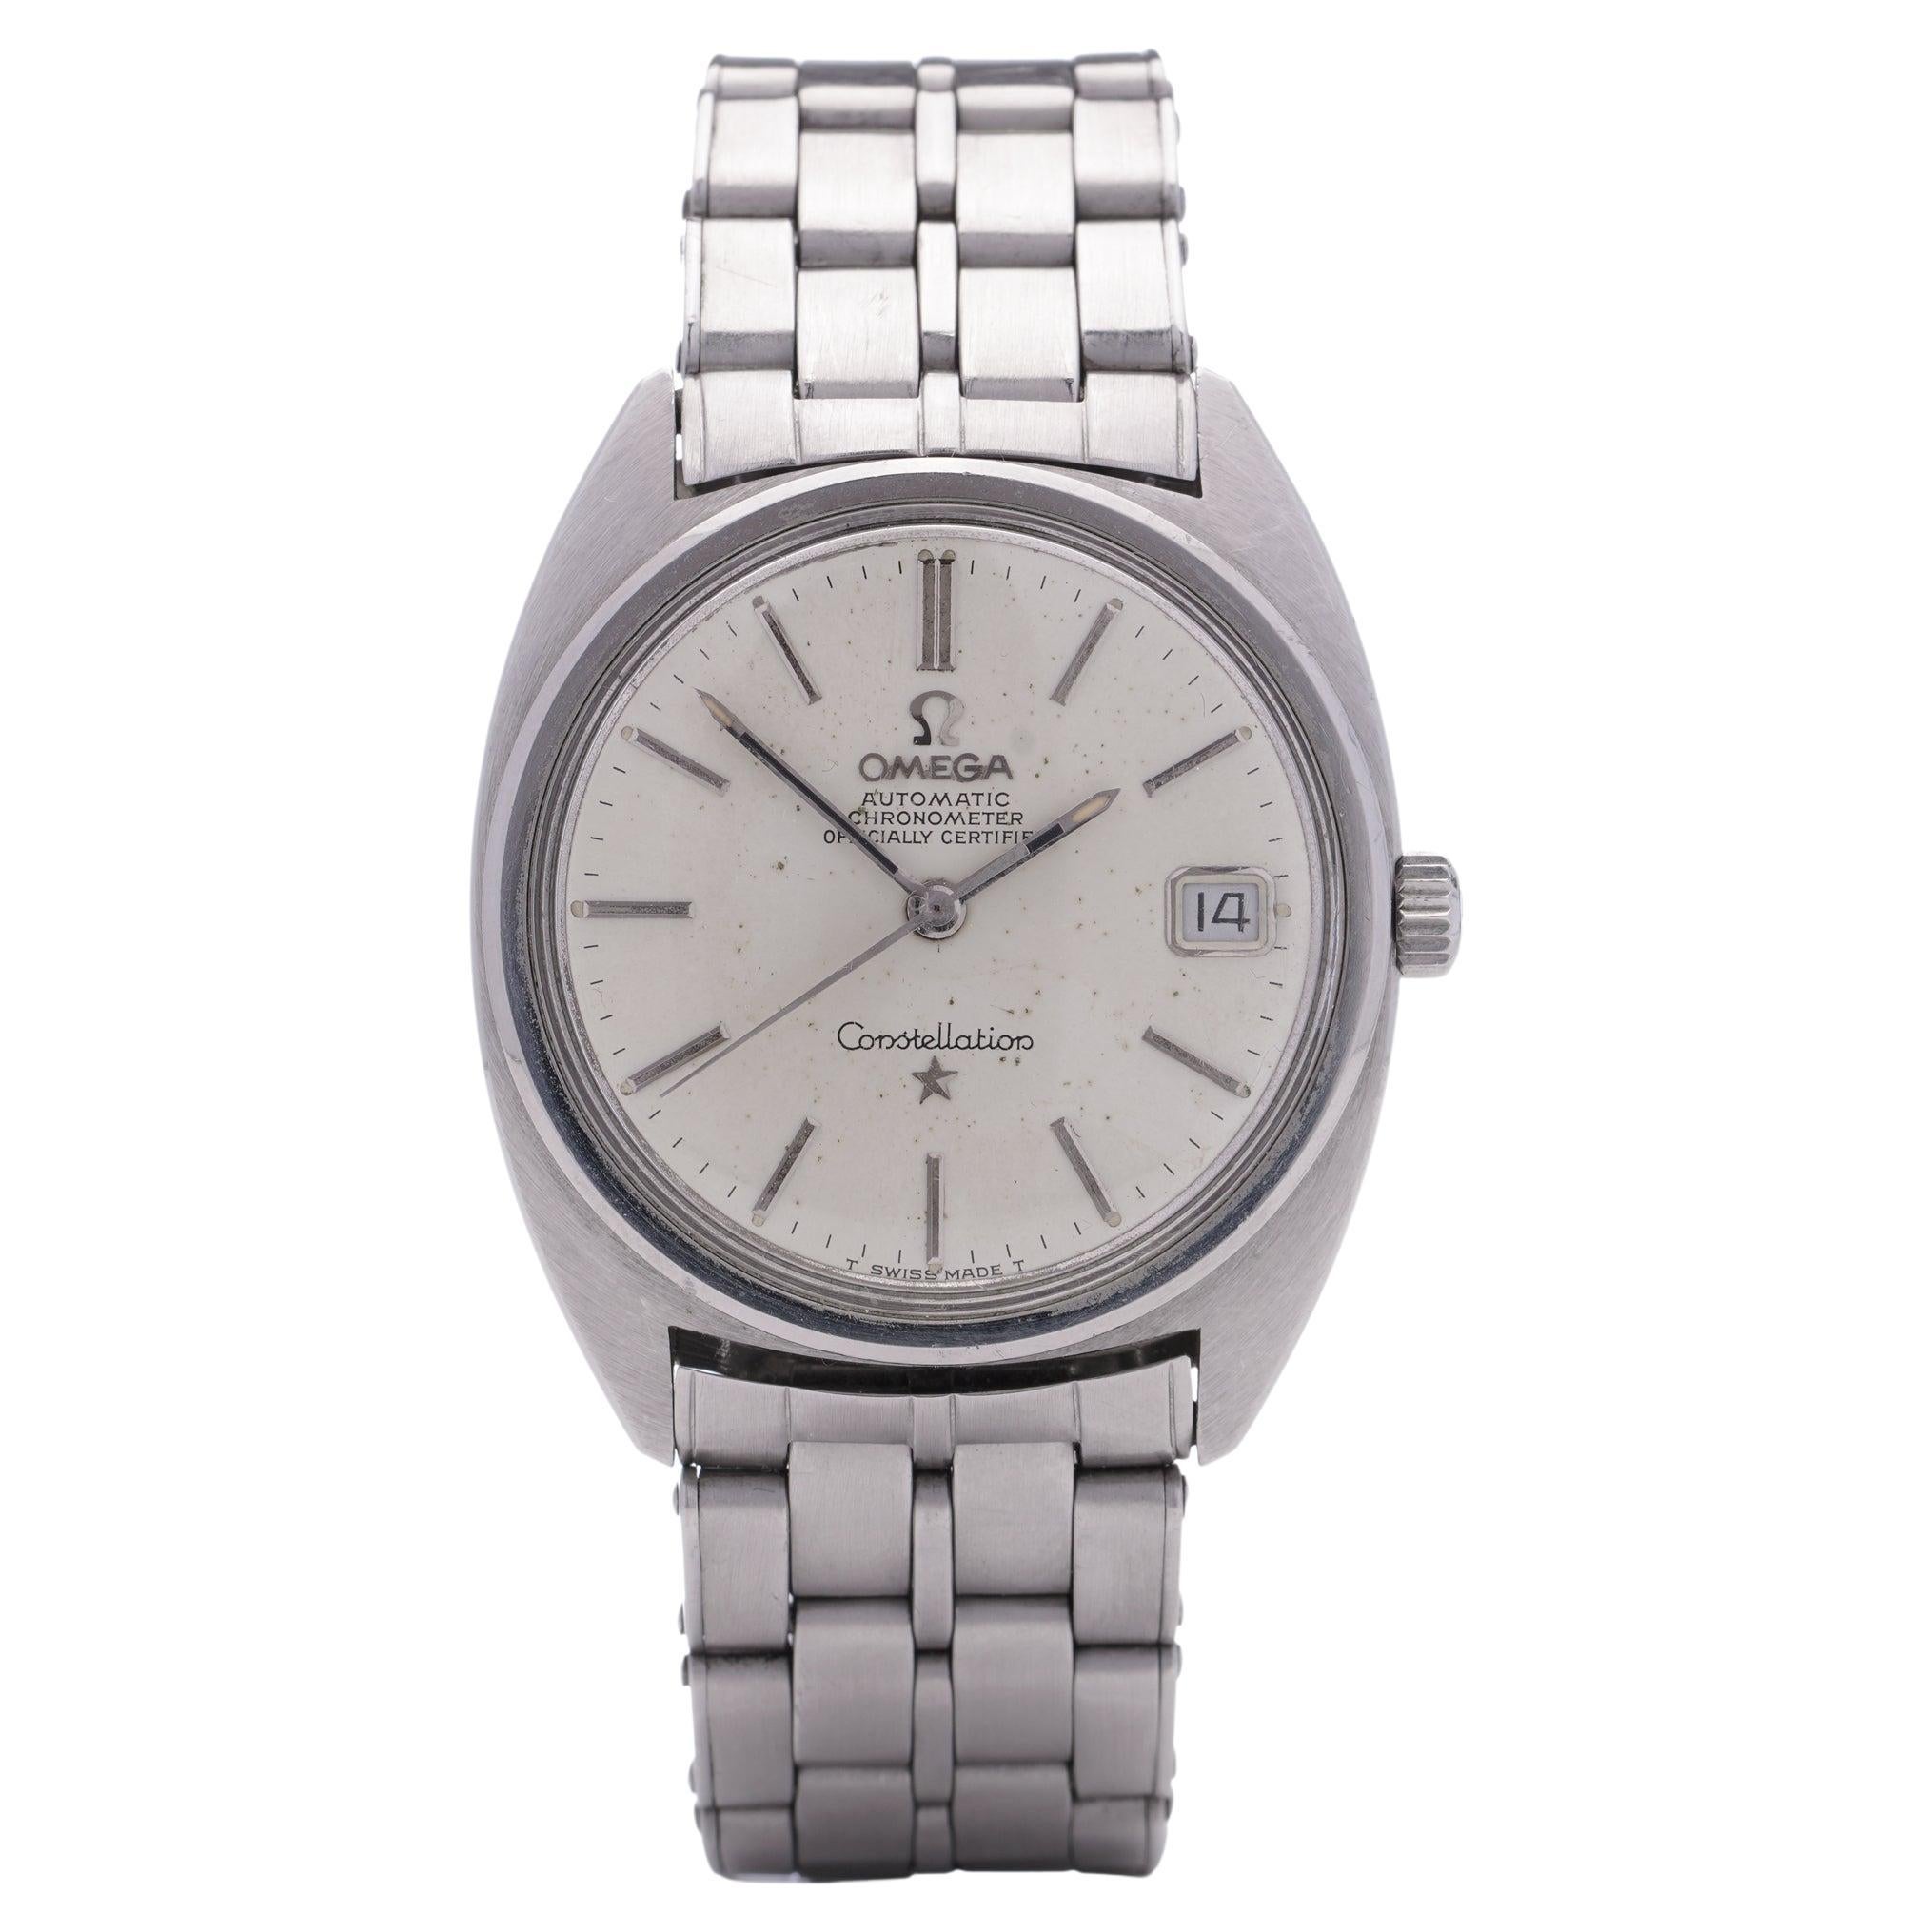 Omega Constellation Chronometer Automatic Vintage Stainless Steel Watch For Sale